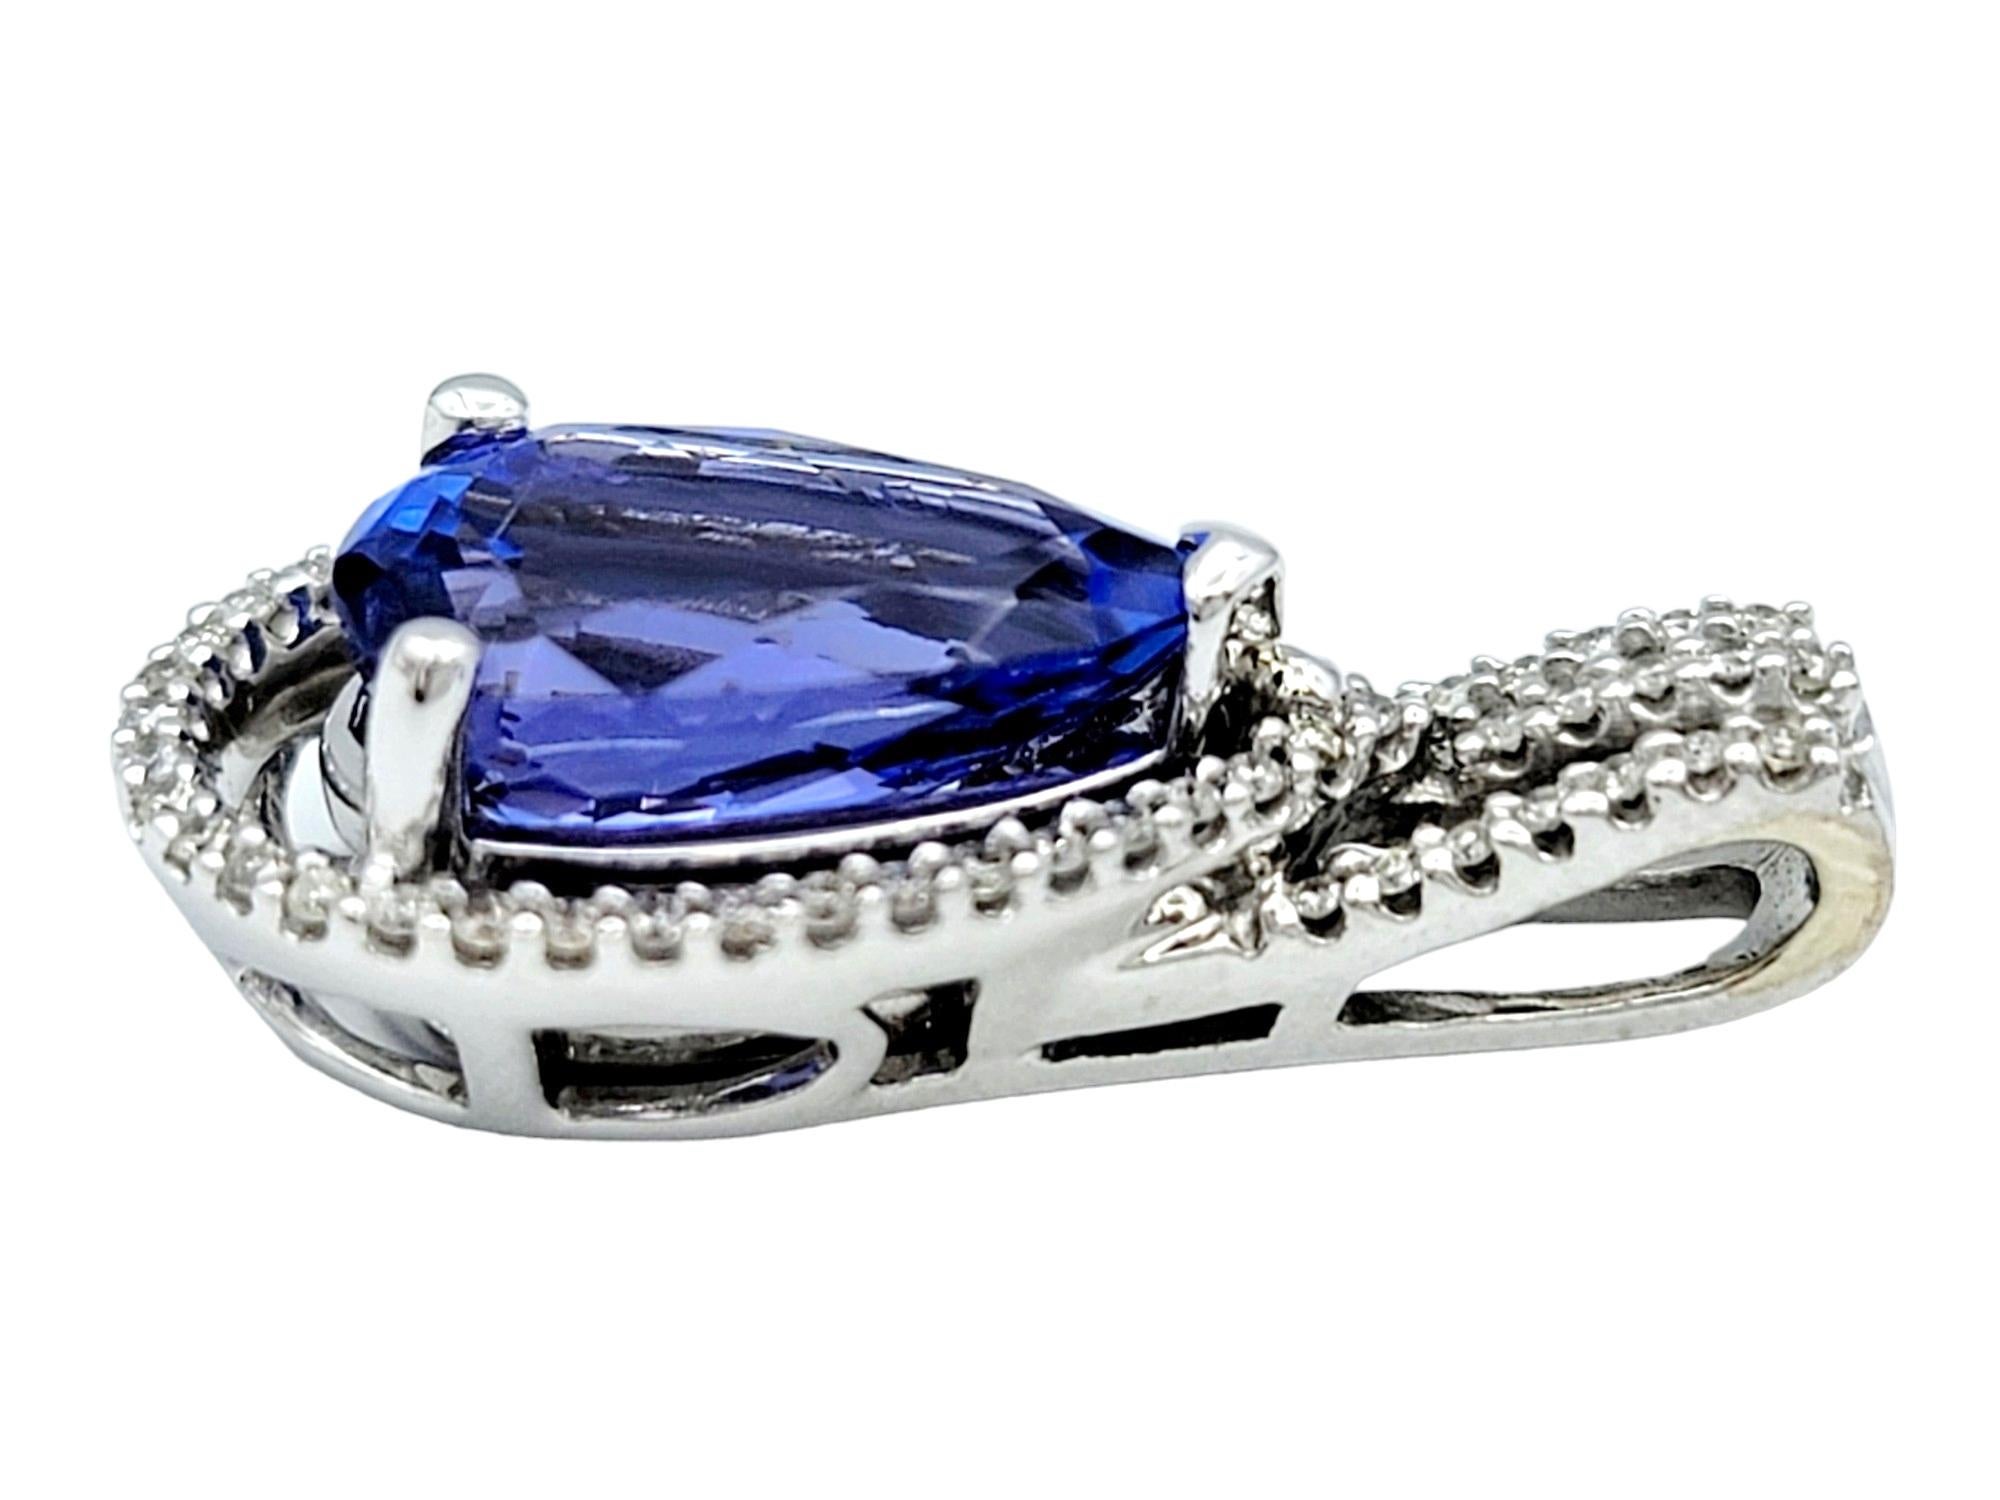 Pear Shaped Blue Tanzanite Pendant with Diamond Halo Set in 14 Karat White Gold In Good Condition For Sale In Scottsdale, AZ